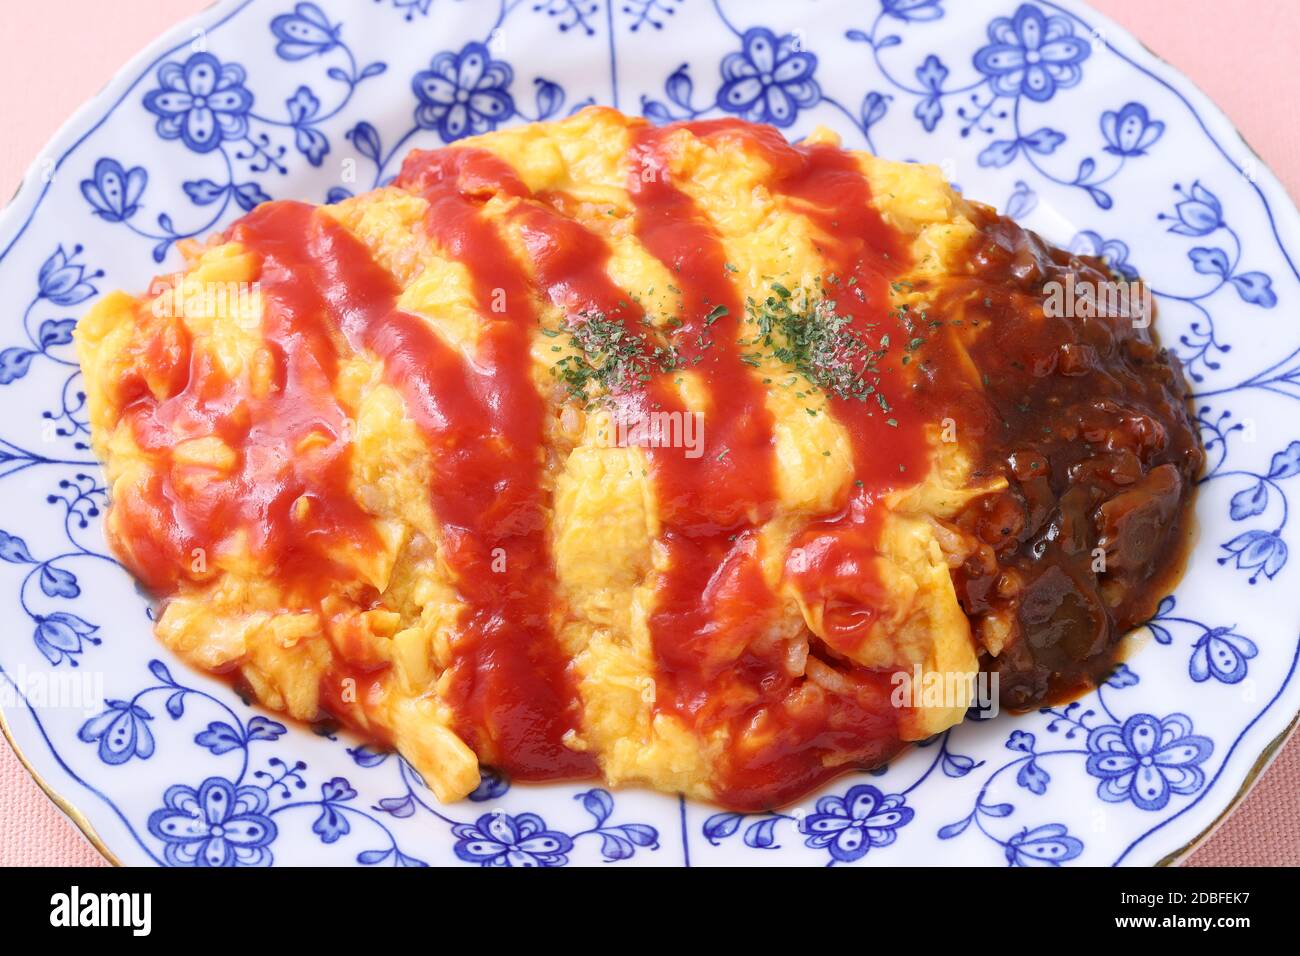 Japanese food, Omuraisu with ketchup in a plate on table Stock Photo